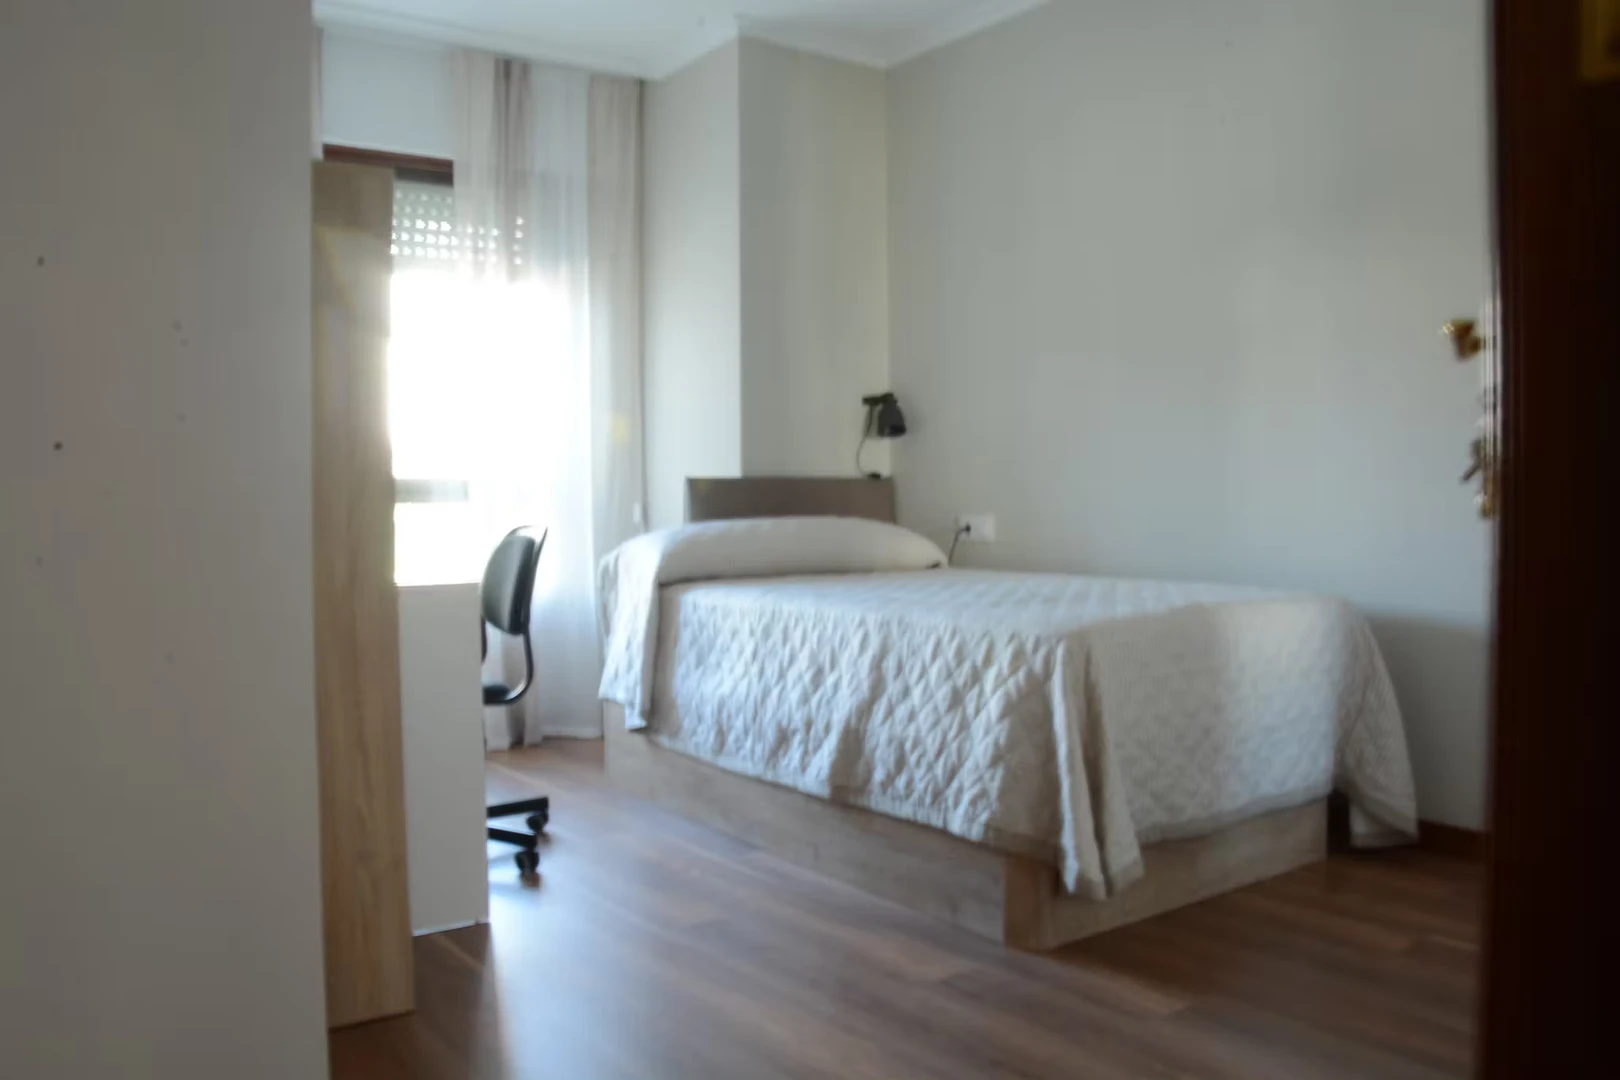 Room for rent in a shared flat in vigo